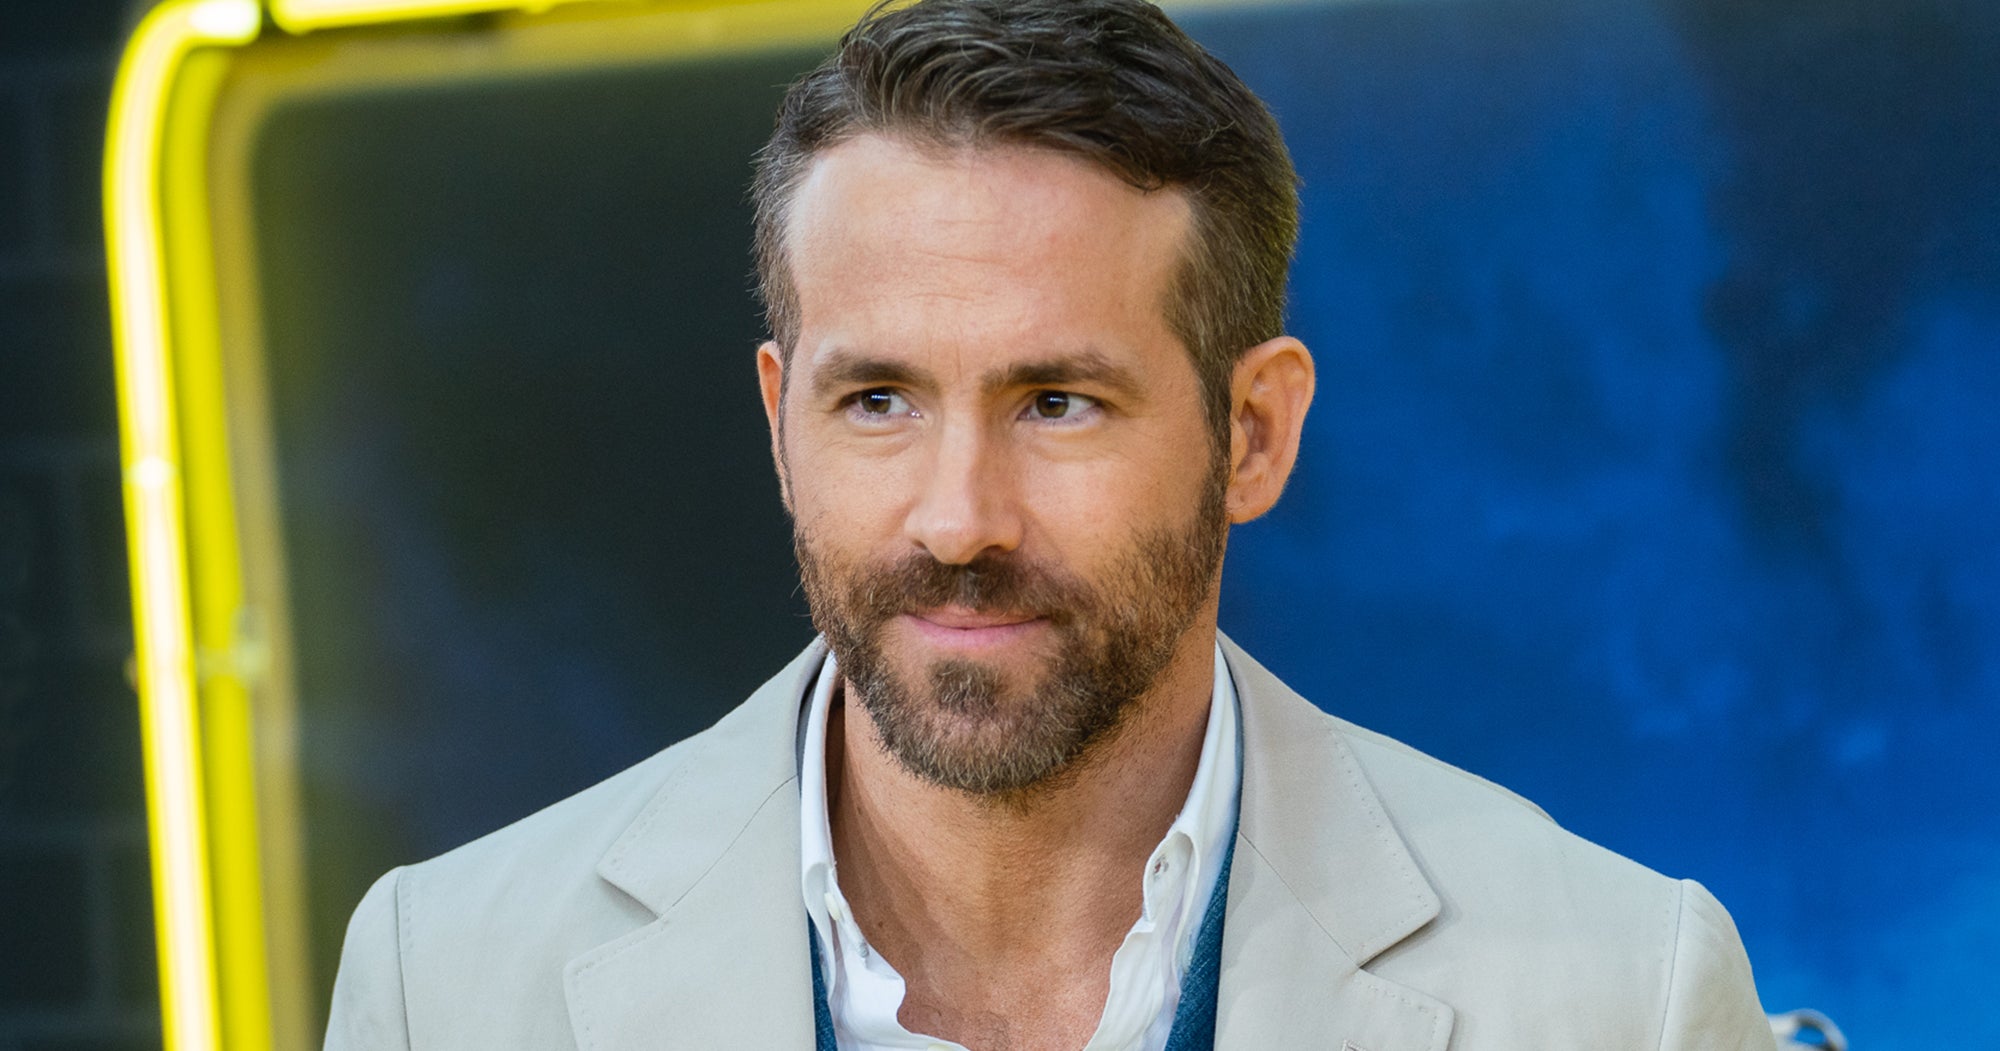 Ryan Reynolds on the set of his latest Netflix's action film 'Six  Underground' in Rome Featuring: Ryan Reynolds Where: Rome, Italy When: 07  Nov 2018 Credit: IPA/WENN.com **Only available for publication in